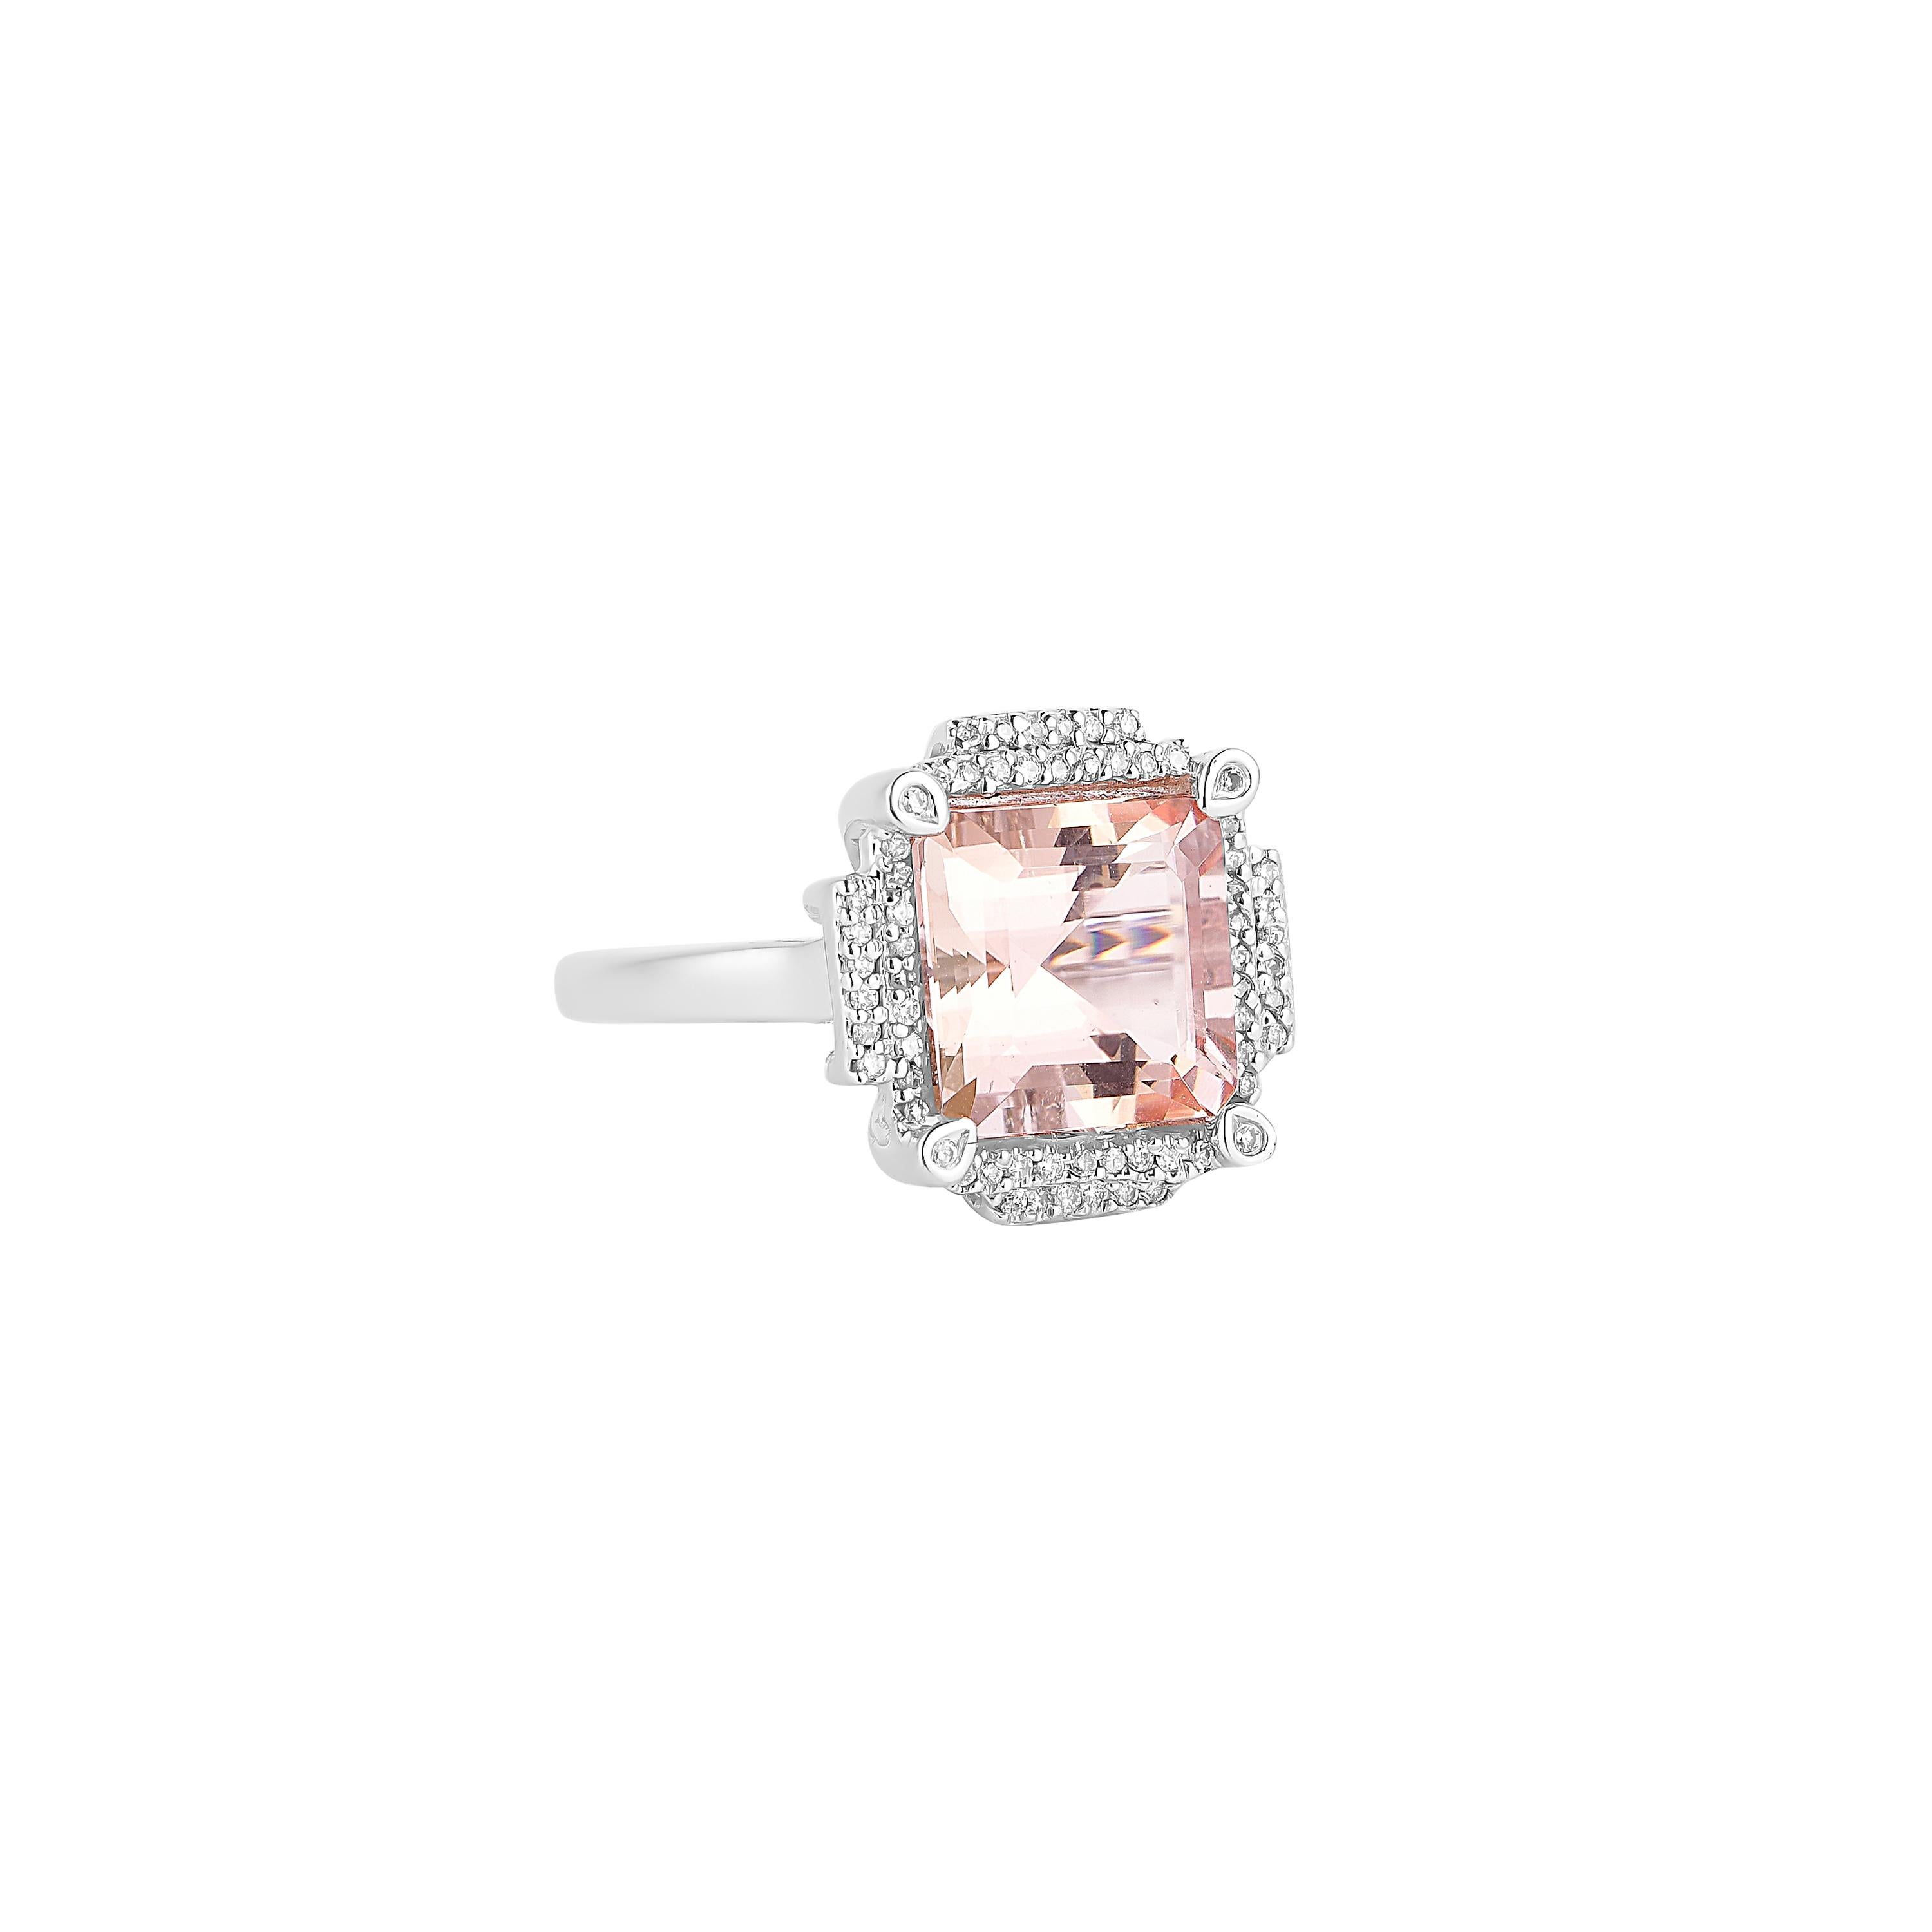 This collection features an array of magnificent morganites! Accented with diamonds these rings are made in white gold and present a classic yet elegant look. 

Classic pink morganite and white diamond ring in 14K white gold. 

Morganite: 4.79 carat